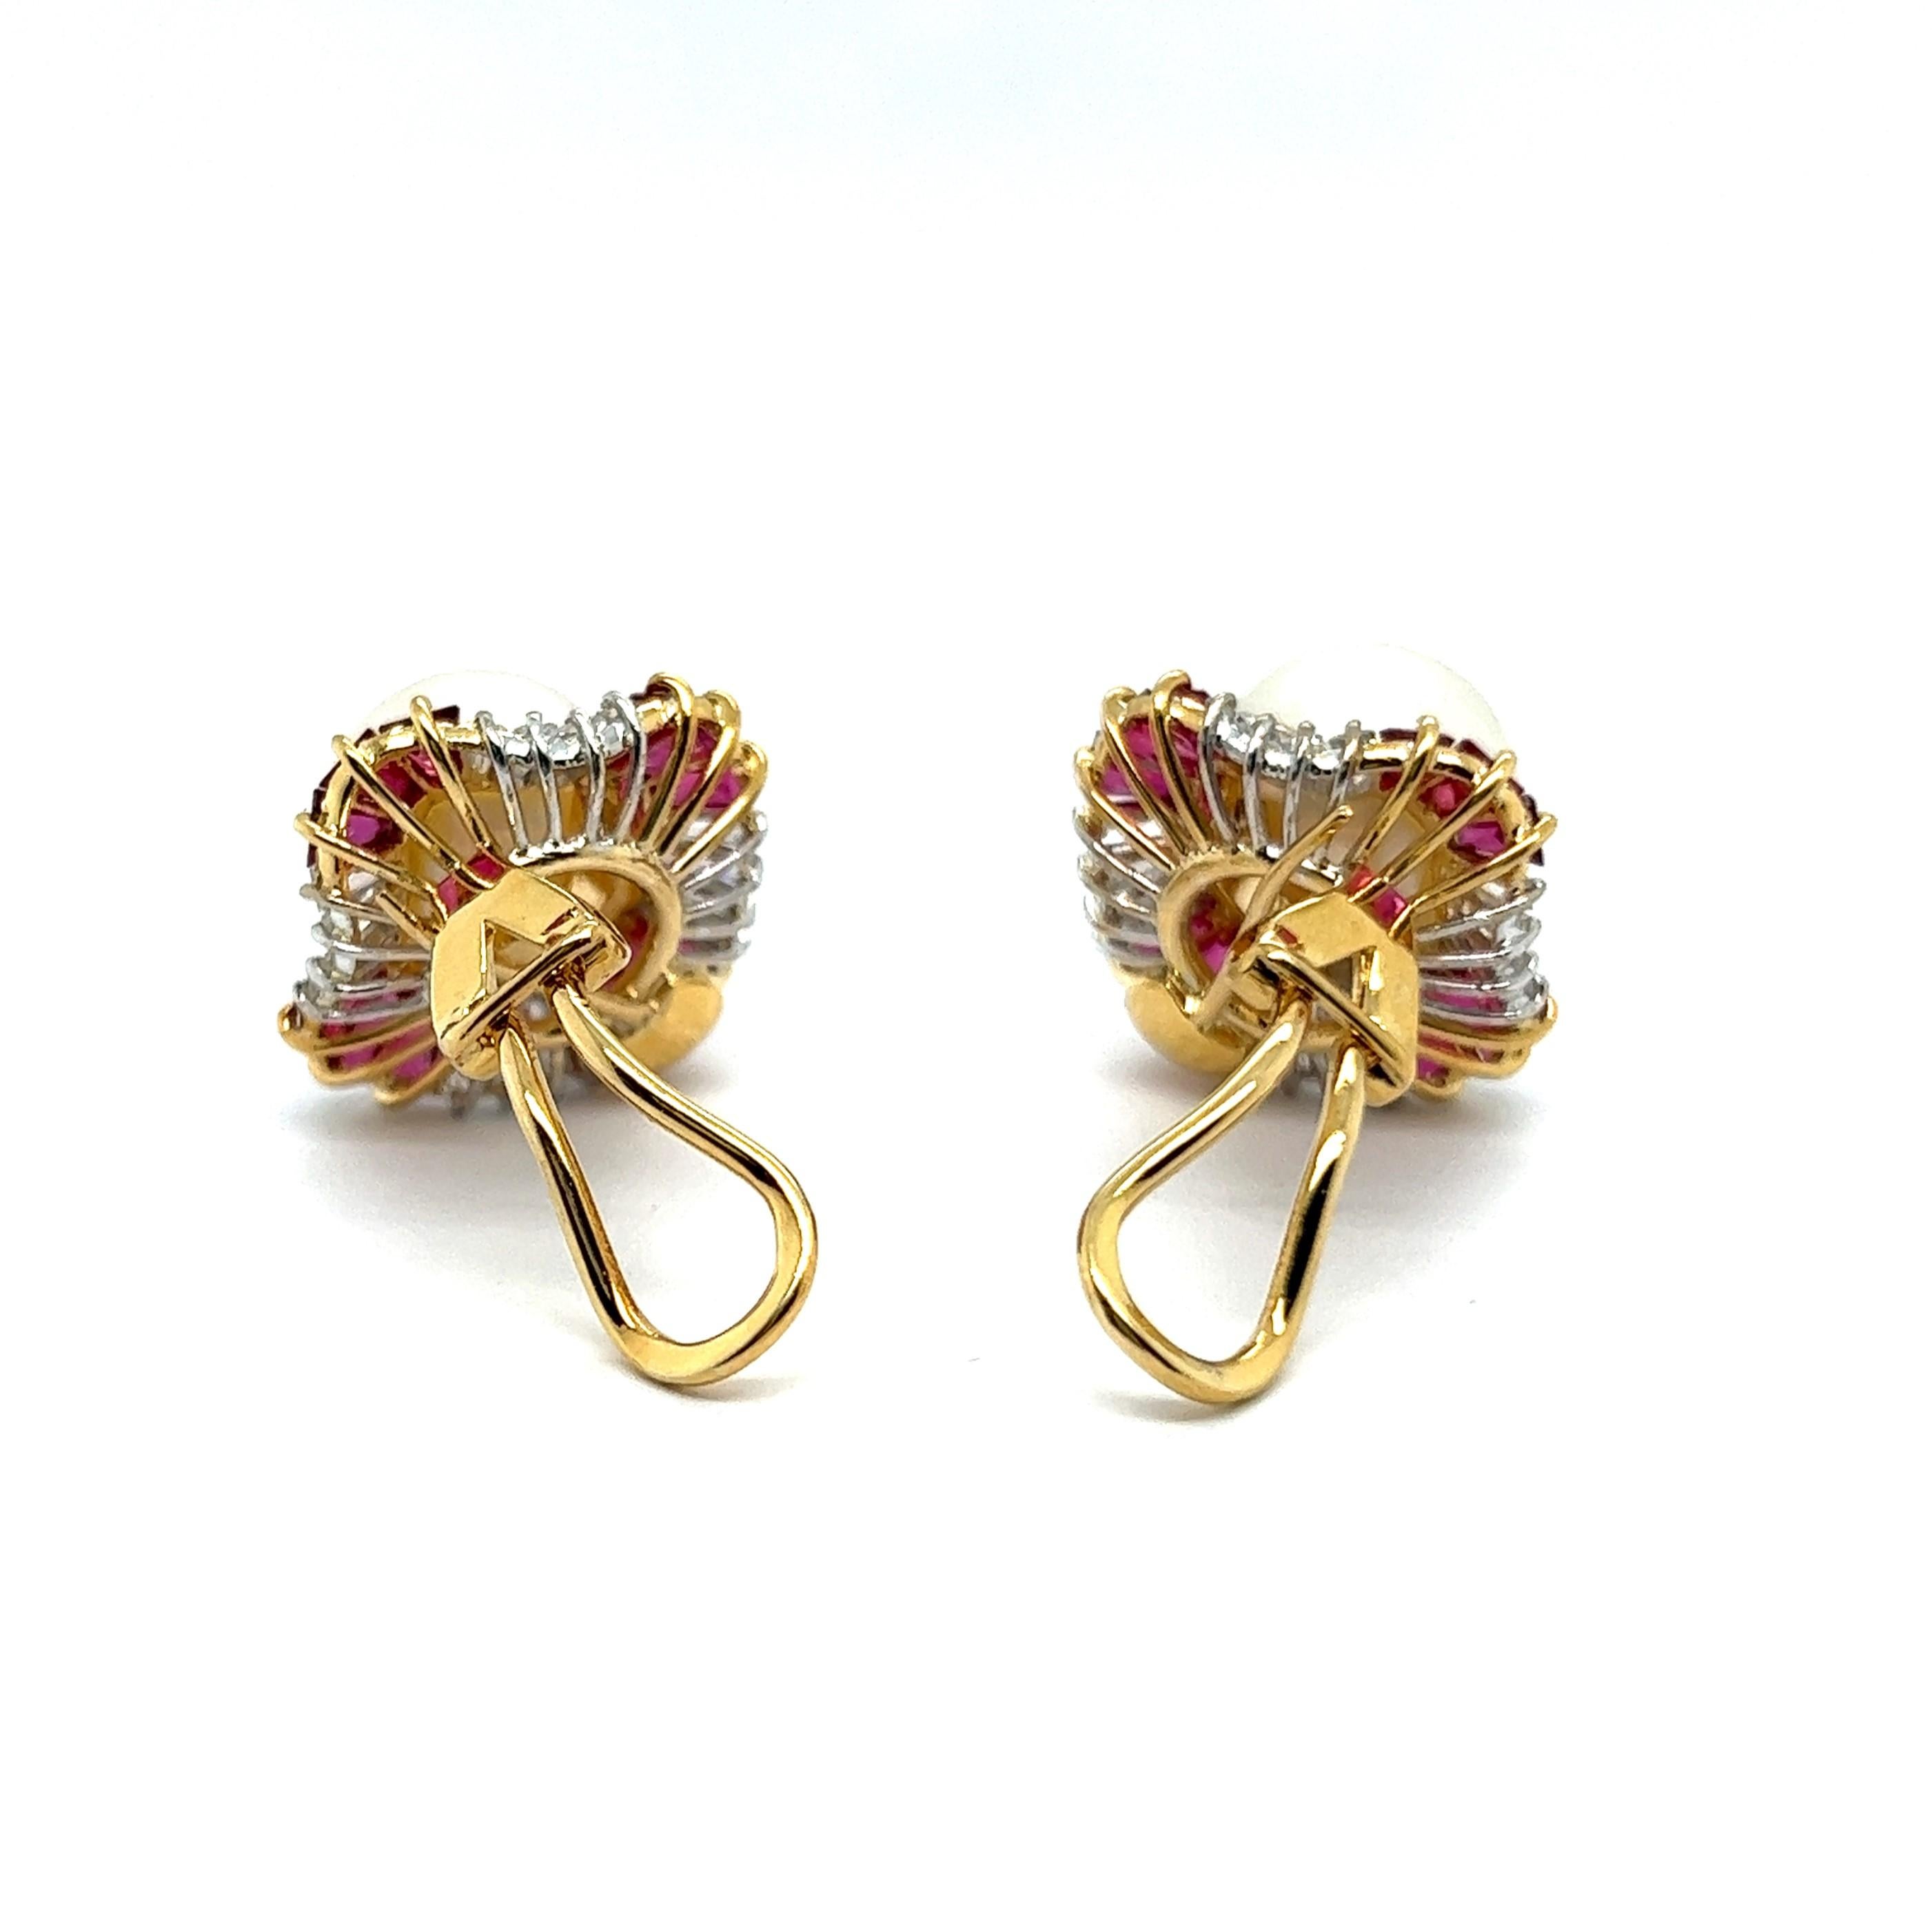 Clip-on Earrings with Pearls, Rubies & Diamonds in 18 Karat Yellow & White Gold For Sale 4